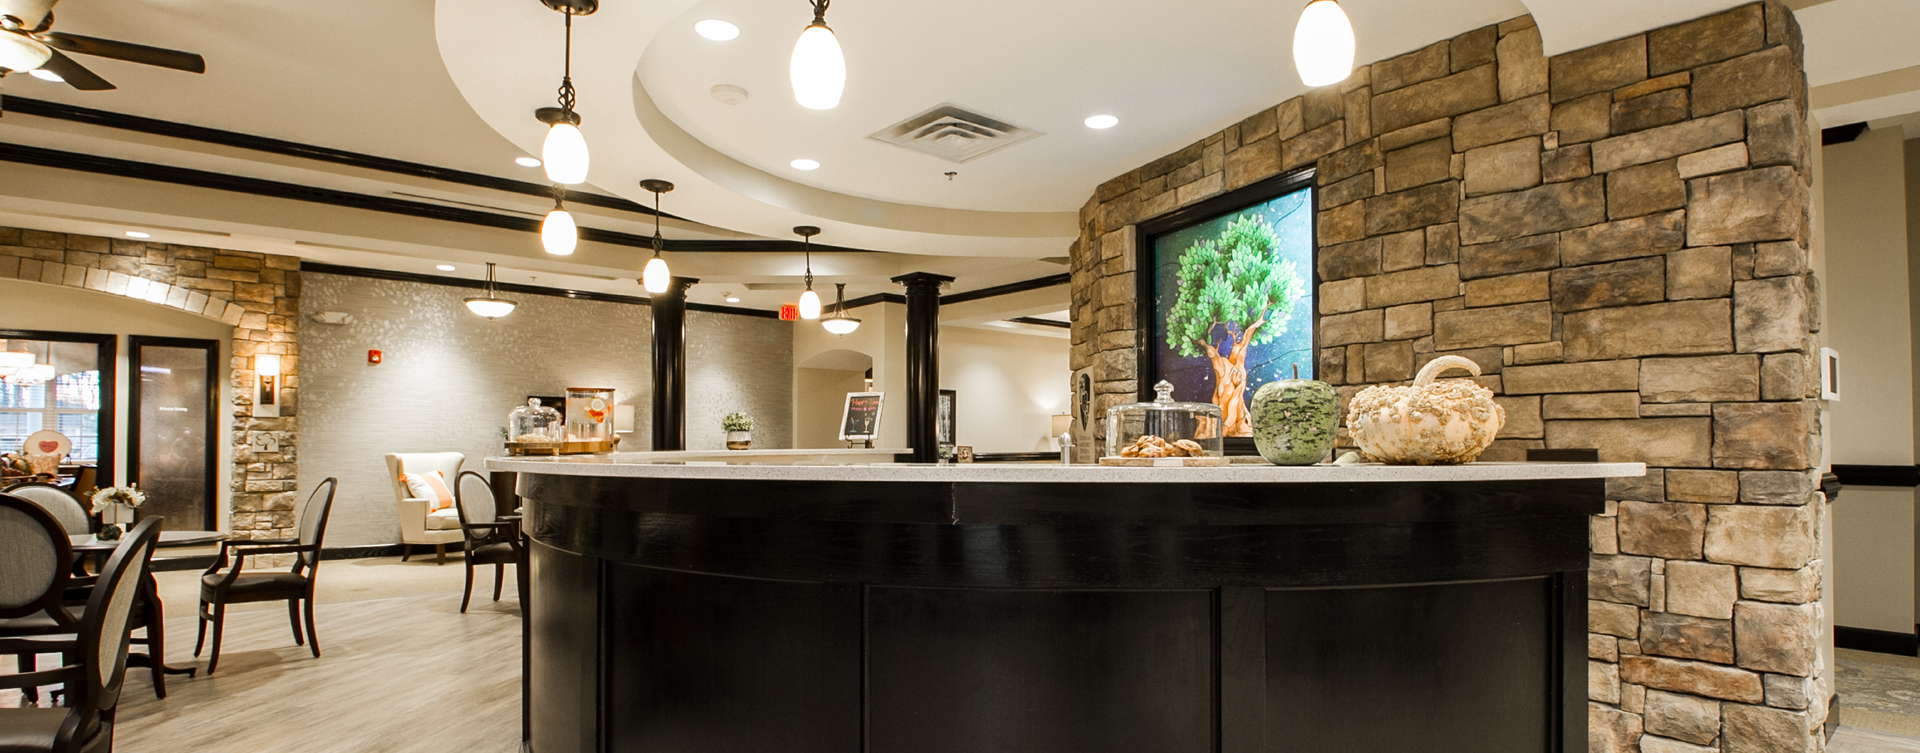 We’re serving up snacks, beverages and service around the clock in the bistro at Bickford of Virginia Beach